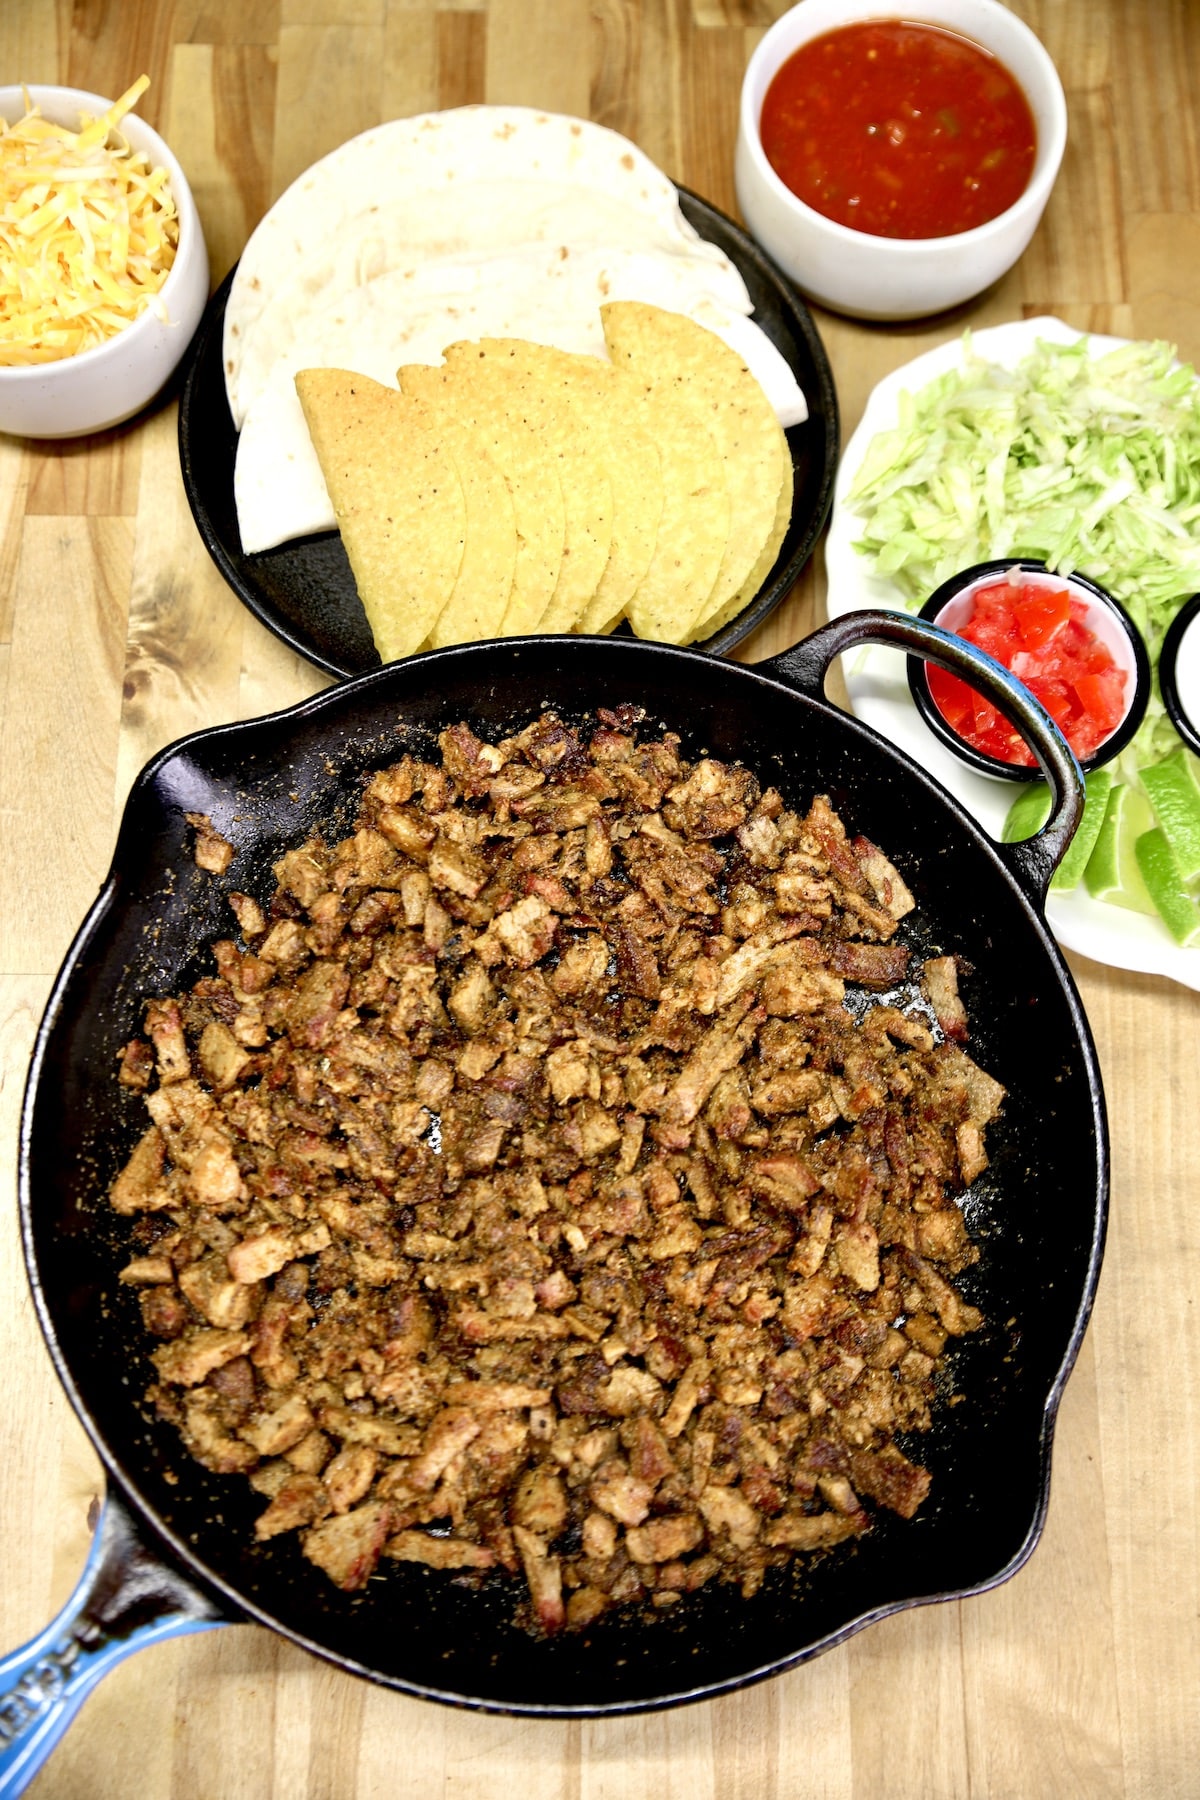 Skillet of chopped brisket, taco shells, toppings.